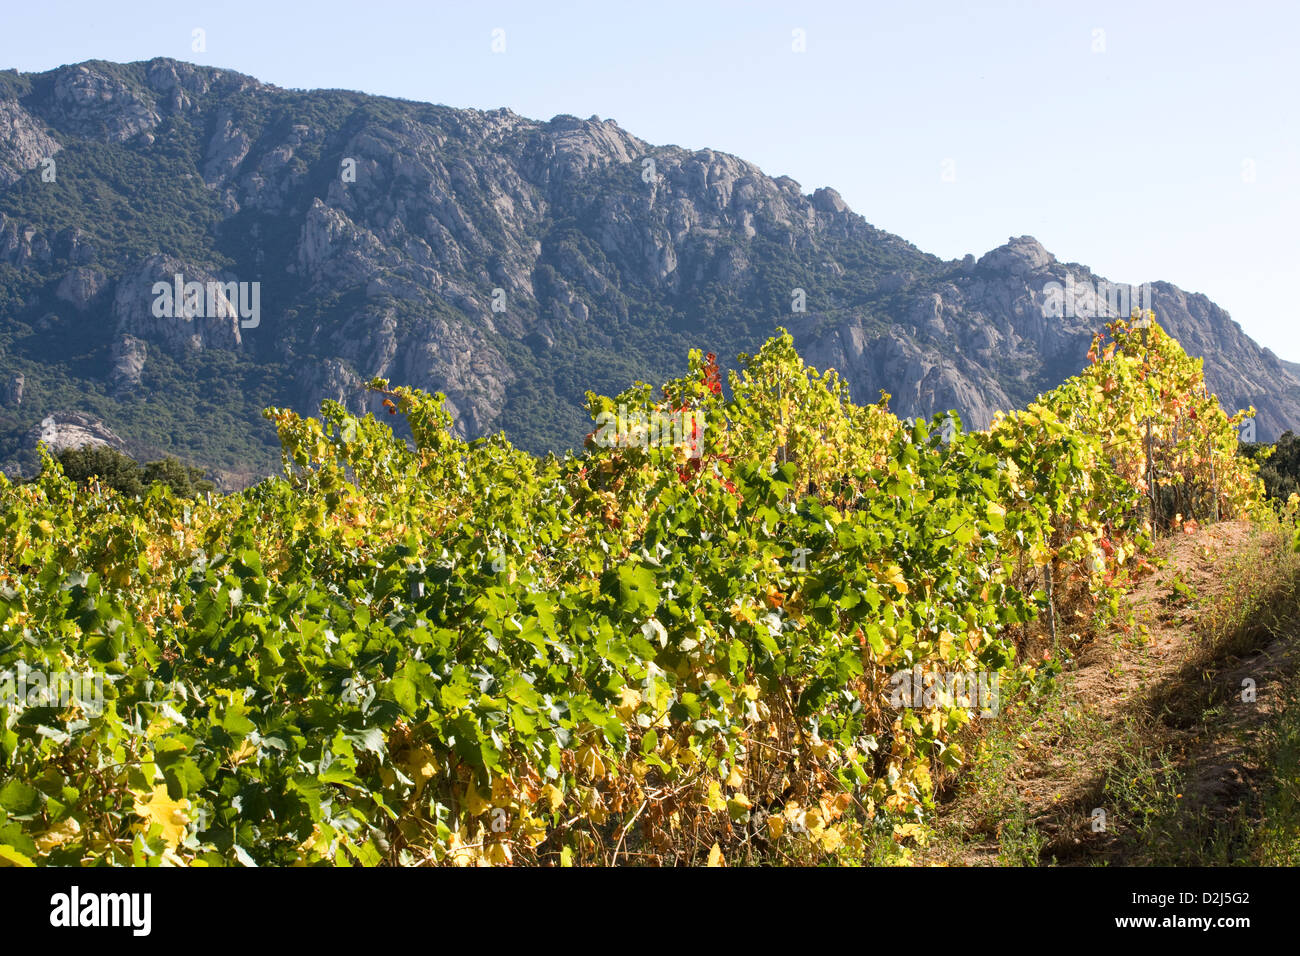 Corsica: Vallee de l'Orto - Domaine Saparale / autumn colors of vines with valley in the background Stock Photo